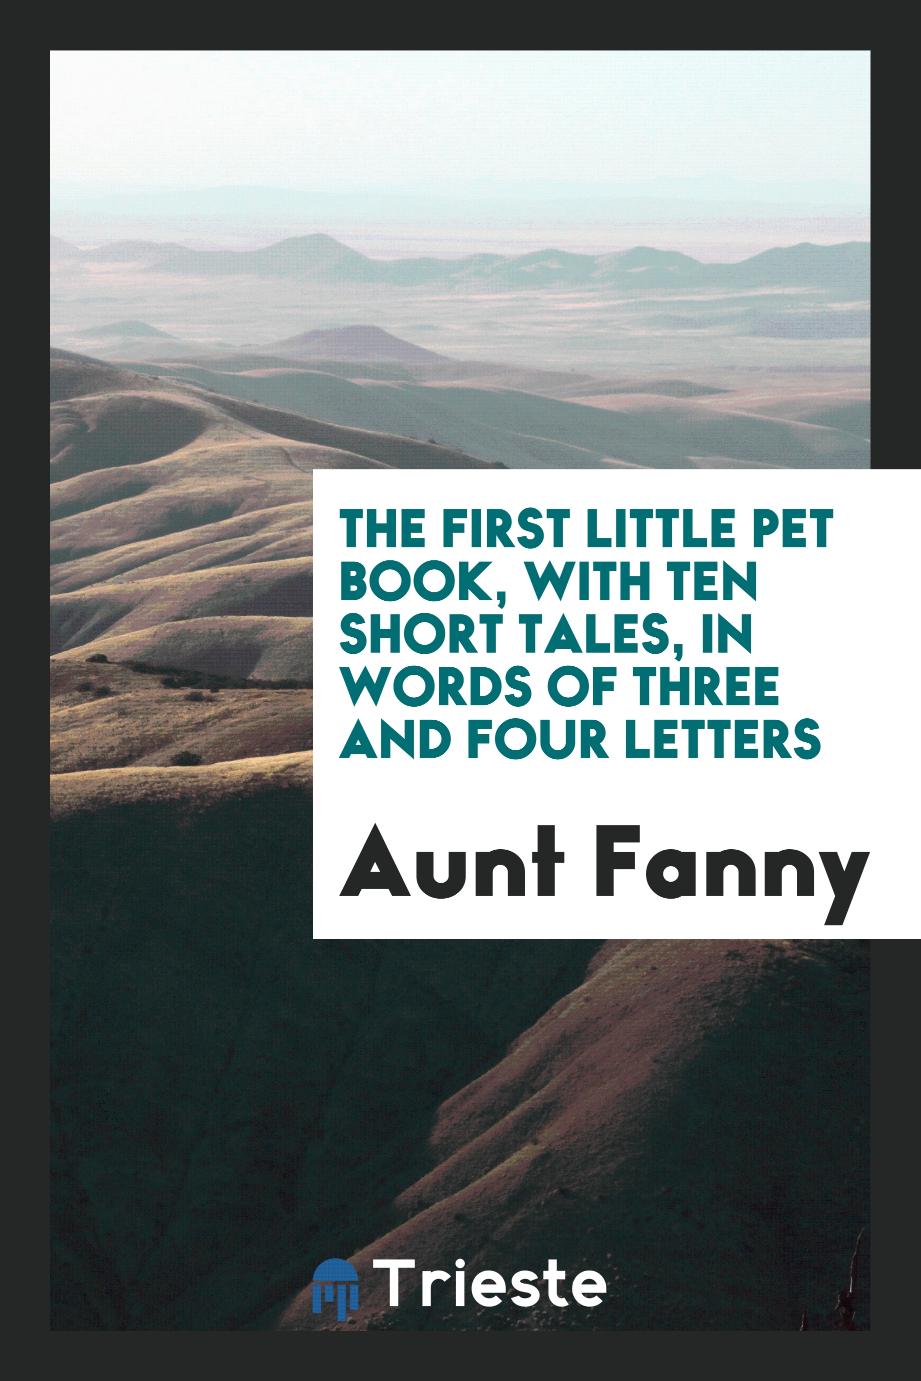 The first little pet book, with ten short tales, in words of three and four letters